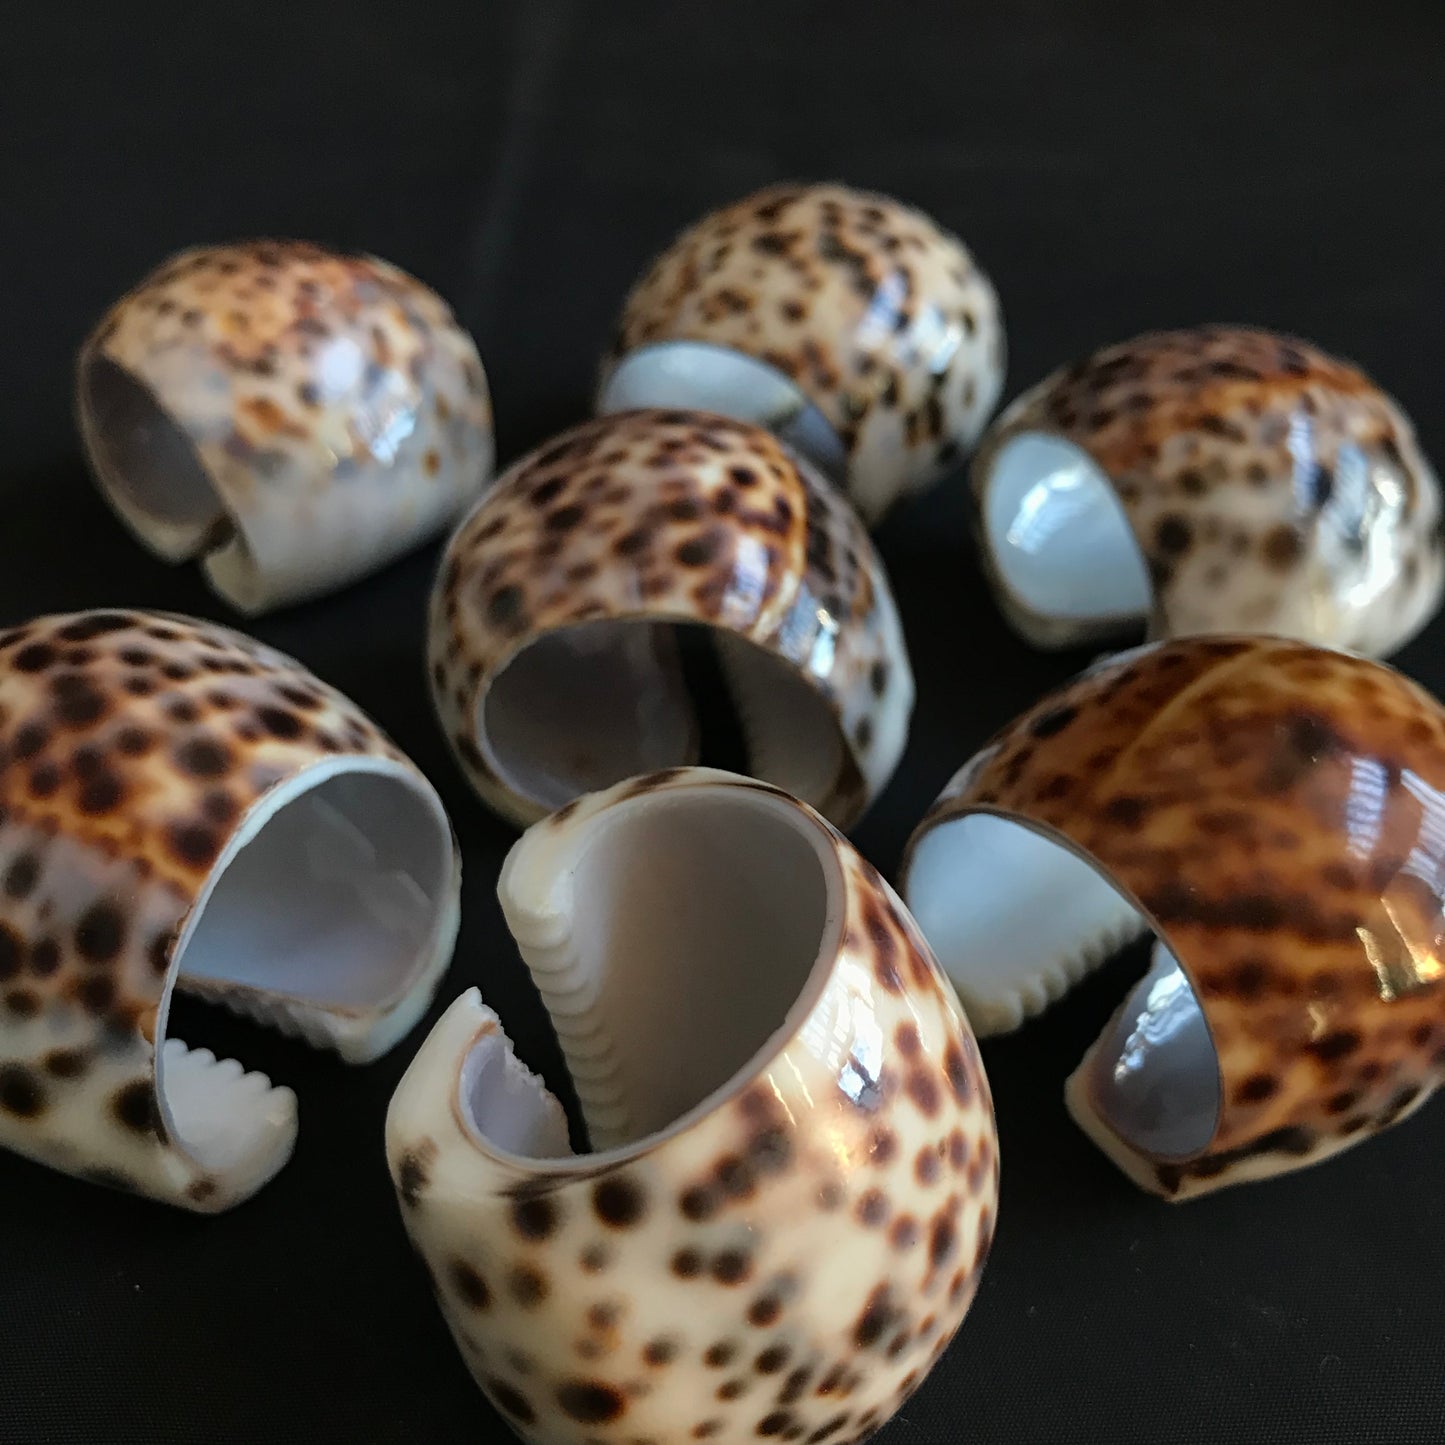 Polished Cowrie Shell Napkin Rings